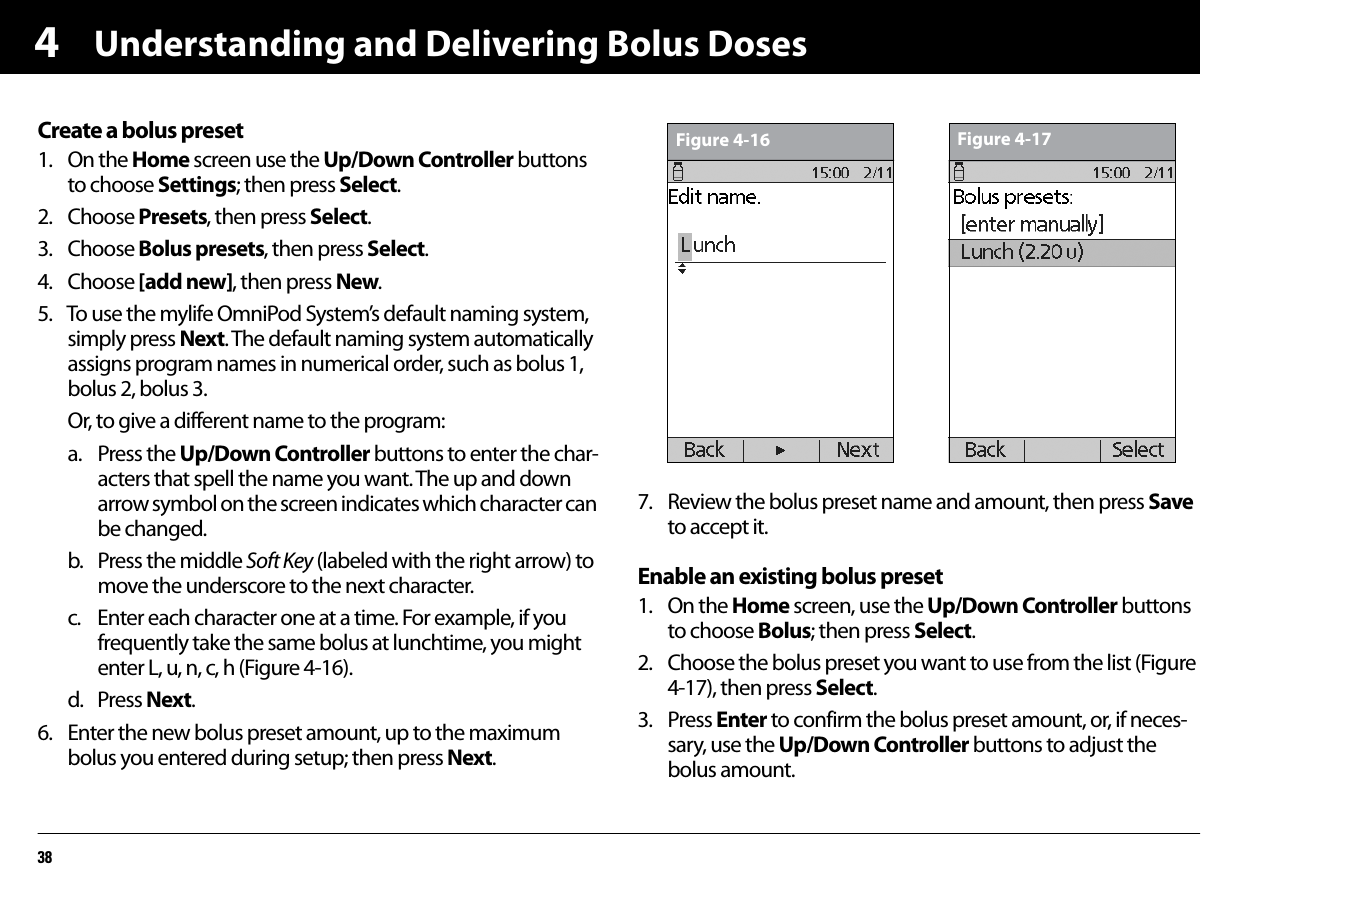 Understanding and Delivering Bolus Doses384Create a bolus preset1. On the Home screen use the Up/Down Controller buttons to choose Settings; then press Select.2. Choose Presets, then press Select.3. Choose Bolus presets, then press Select.4. Choose [add new], then press New.5. To use the mylife OmniPod System’s default naming system, simply press Next. The default naming system automatically assigns program names in numerical order, such as bolus 1, bolus 2, bolus 3.Or, to give a different name to the program:a. Press the Up/Down Controller buttons to enter the char-acters that spell the name you want. The up and down arrow symbol on the screen indicates which character can be changed.b. Press the middle Soft Key (labeled with the right arrow) to move the underscore to the next character.c. Enter each character one at a time. For example, if you frequently take the same bolus at lunchtime, you might enter L, u, n, c, h (Figure 4-16).d. Press Next.6. Enter the new bolus preset amount, up to the maximum bolus you entered during setup; then press Next. 7. Review the bolus preset name and amount, then press Save to accept it. Enable an existing bolus preset1. On the Home screen, use the Up/Down Controller buttons to choose Bolus; then press Select.2. Choose the bolus preset you want to use from the list (Figure 4-17), then press Select.3. Press Enter to confirm the bolus preset amount, or, if neces-sary, use the Up/Down Controller buttons to adjust the bolus amount.Figure 4-16 Figure 4-17